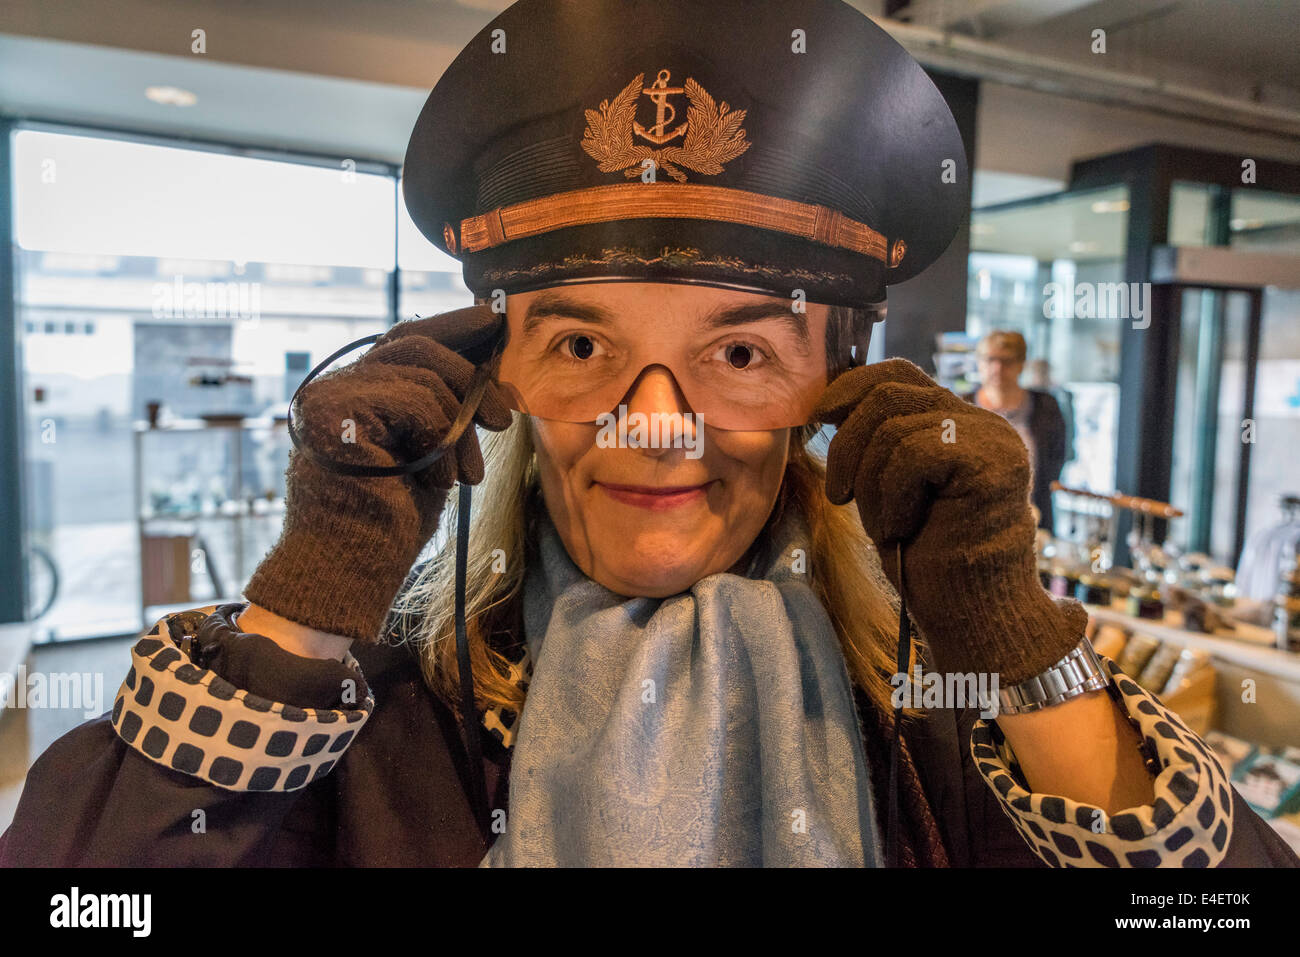 Woman wearing a captain's mask during the Seaman's festival, Reykjavik, Iceland Stock Photo